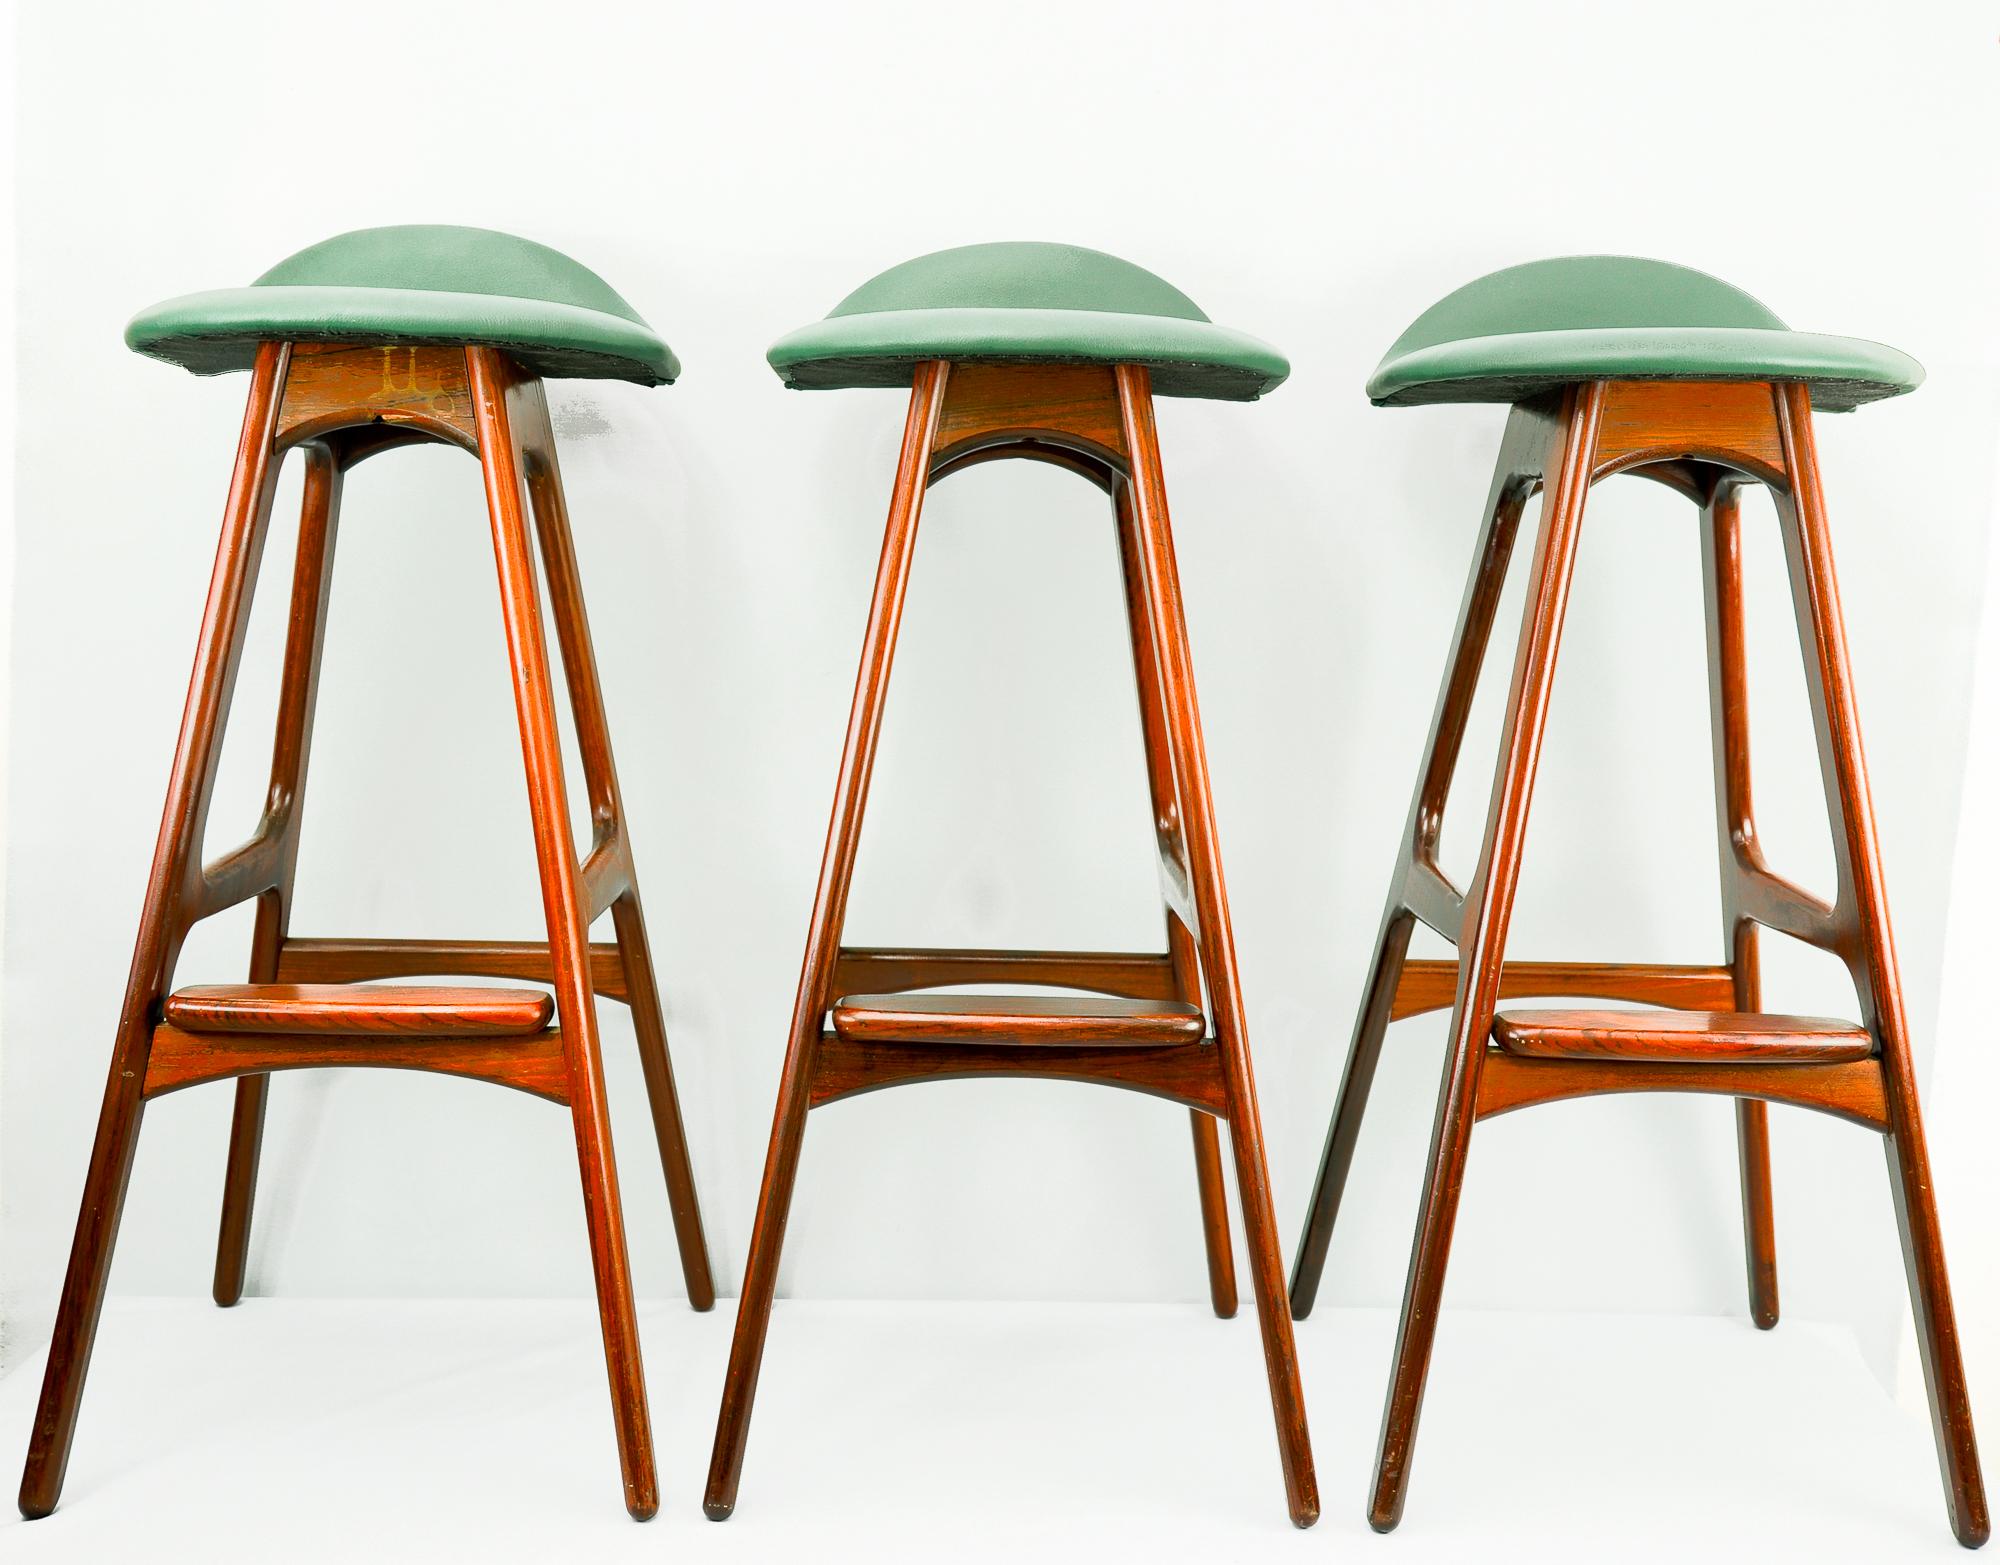 Rosewood bar stools OD 61 by Erik Buch for Oddense Maskinsnedkeri, 1960s
The leather on top is made new.
The wood is slightly refreshed.

 